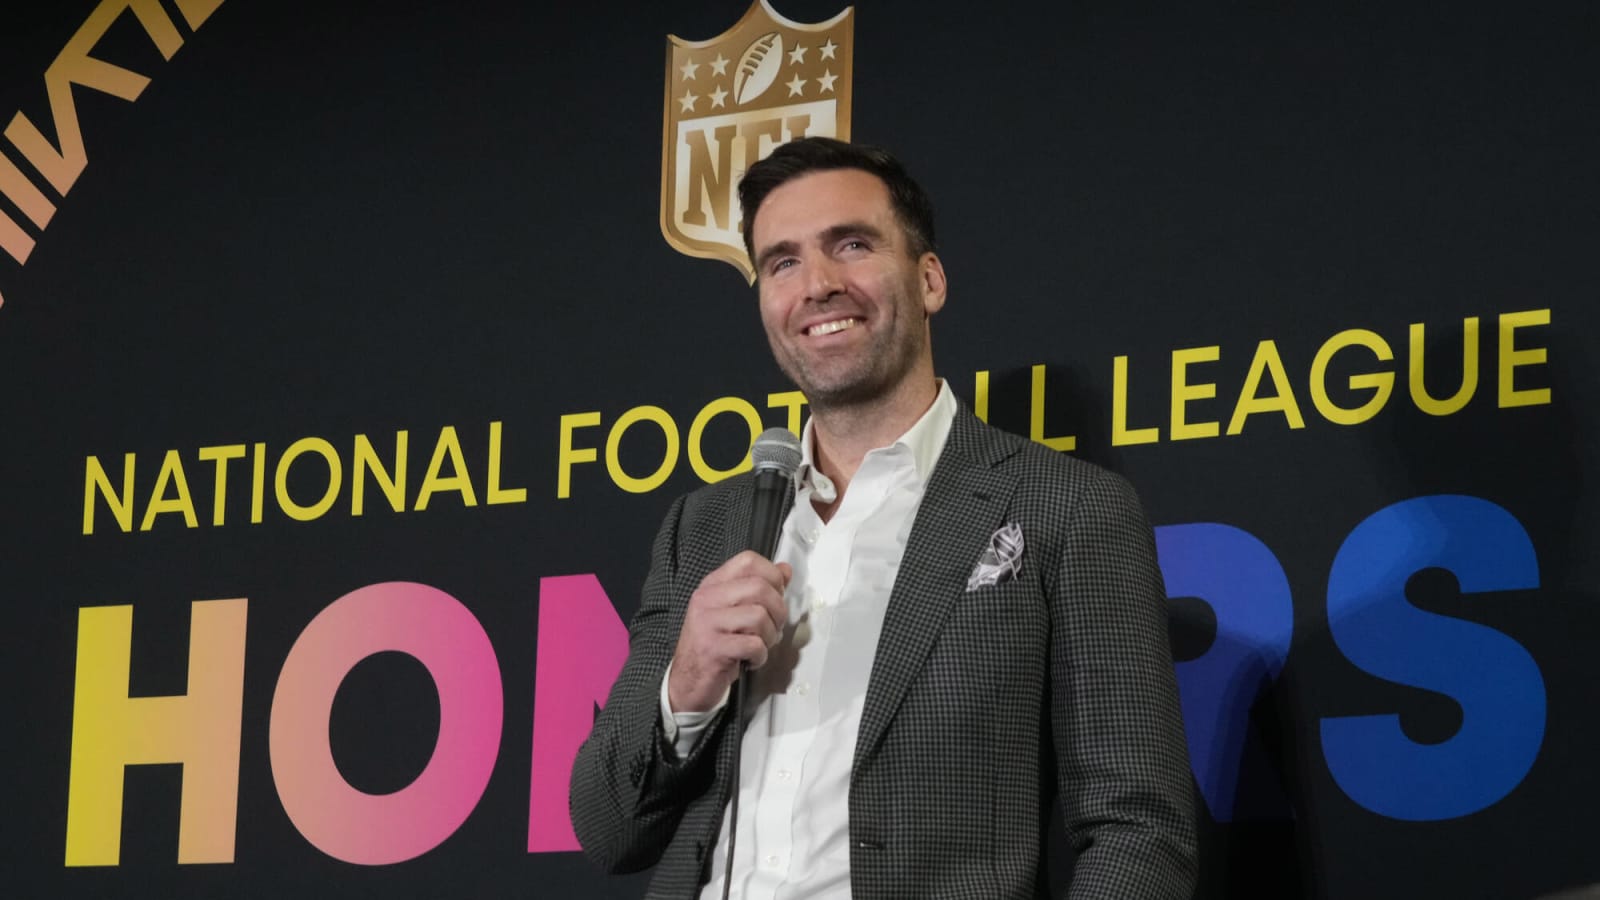 Ravens Ex Joe Flacco Thanks Cleveland After Winning NFL Comeback Player of the Year